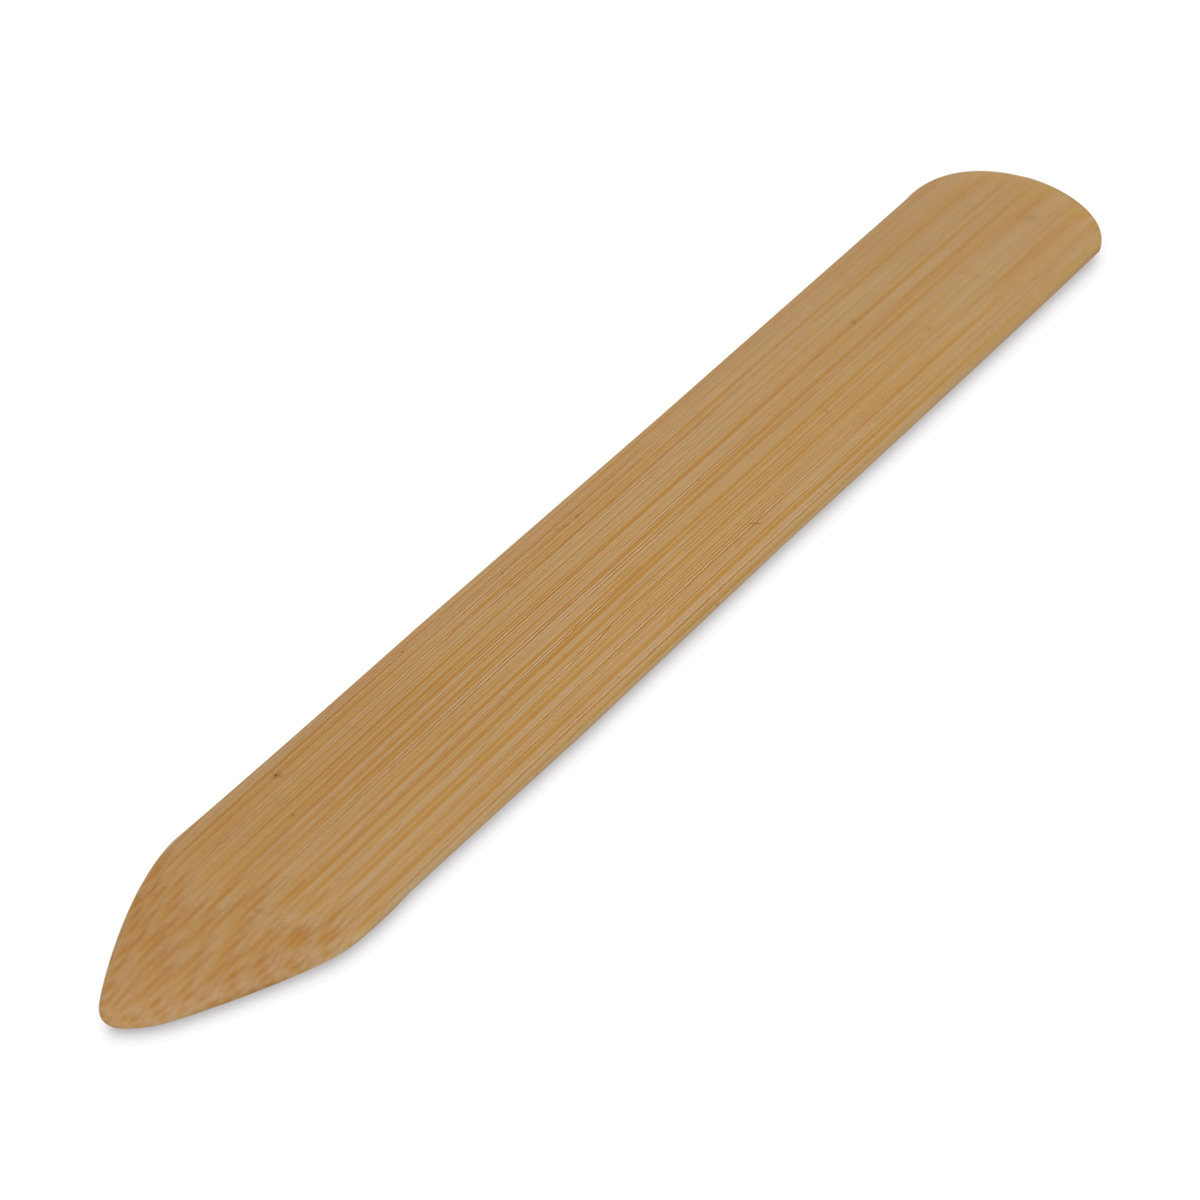 Bamboo Paper Folding Tool 7.875 in.